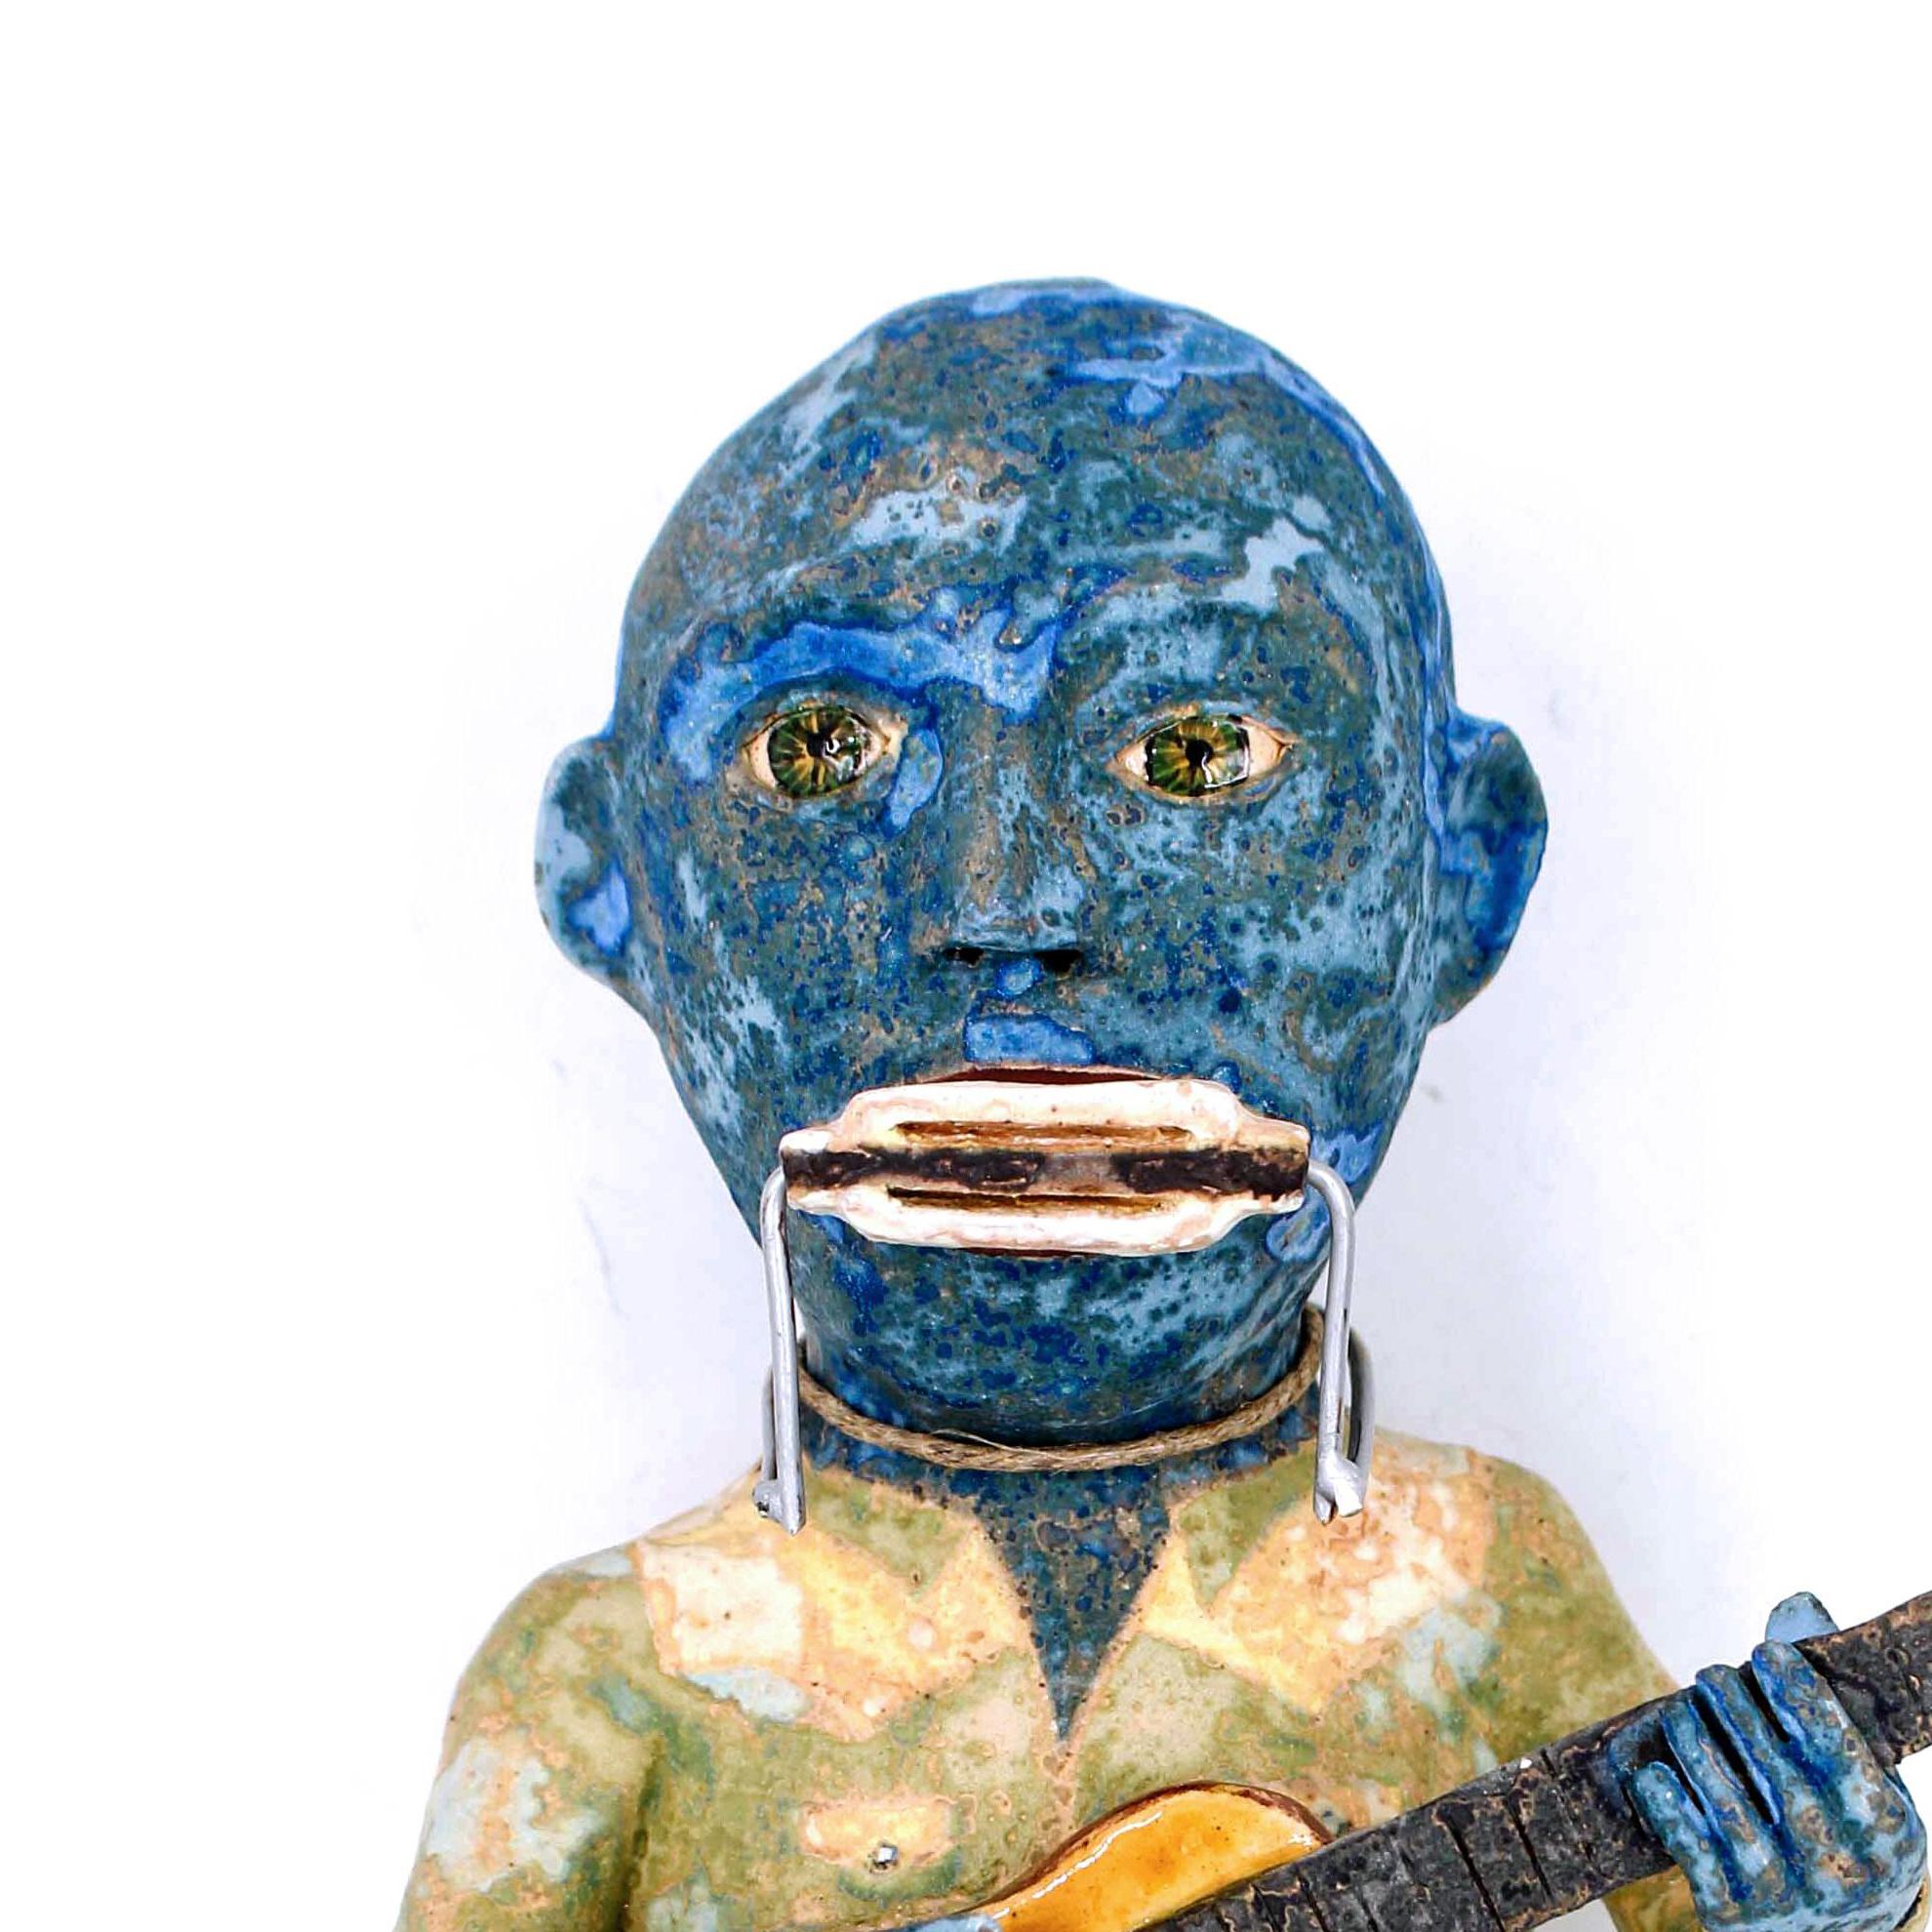 Blues Man is a 2018 ceramic earthenware scultpure by Wesley Anderegg. Blues Man is stamped by the artist with their initials.